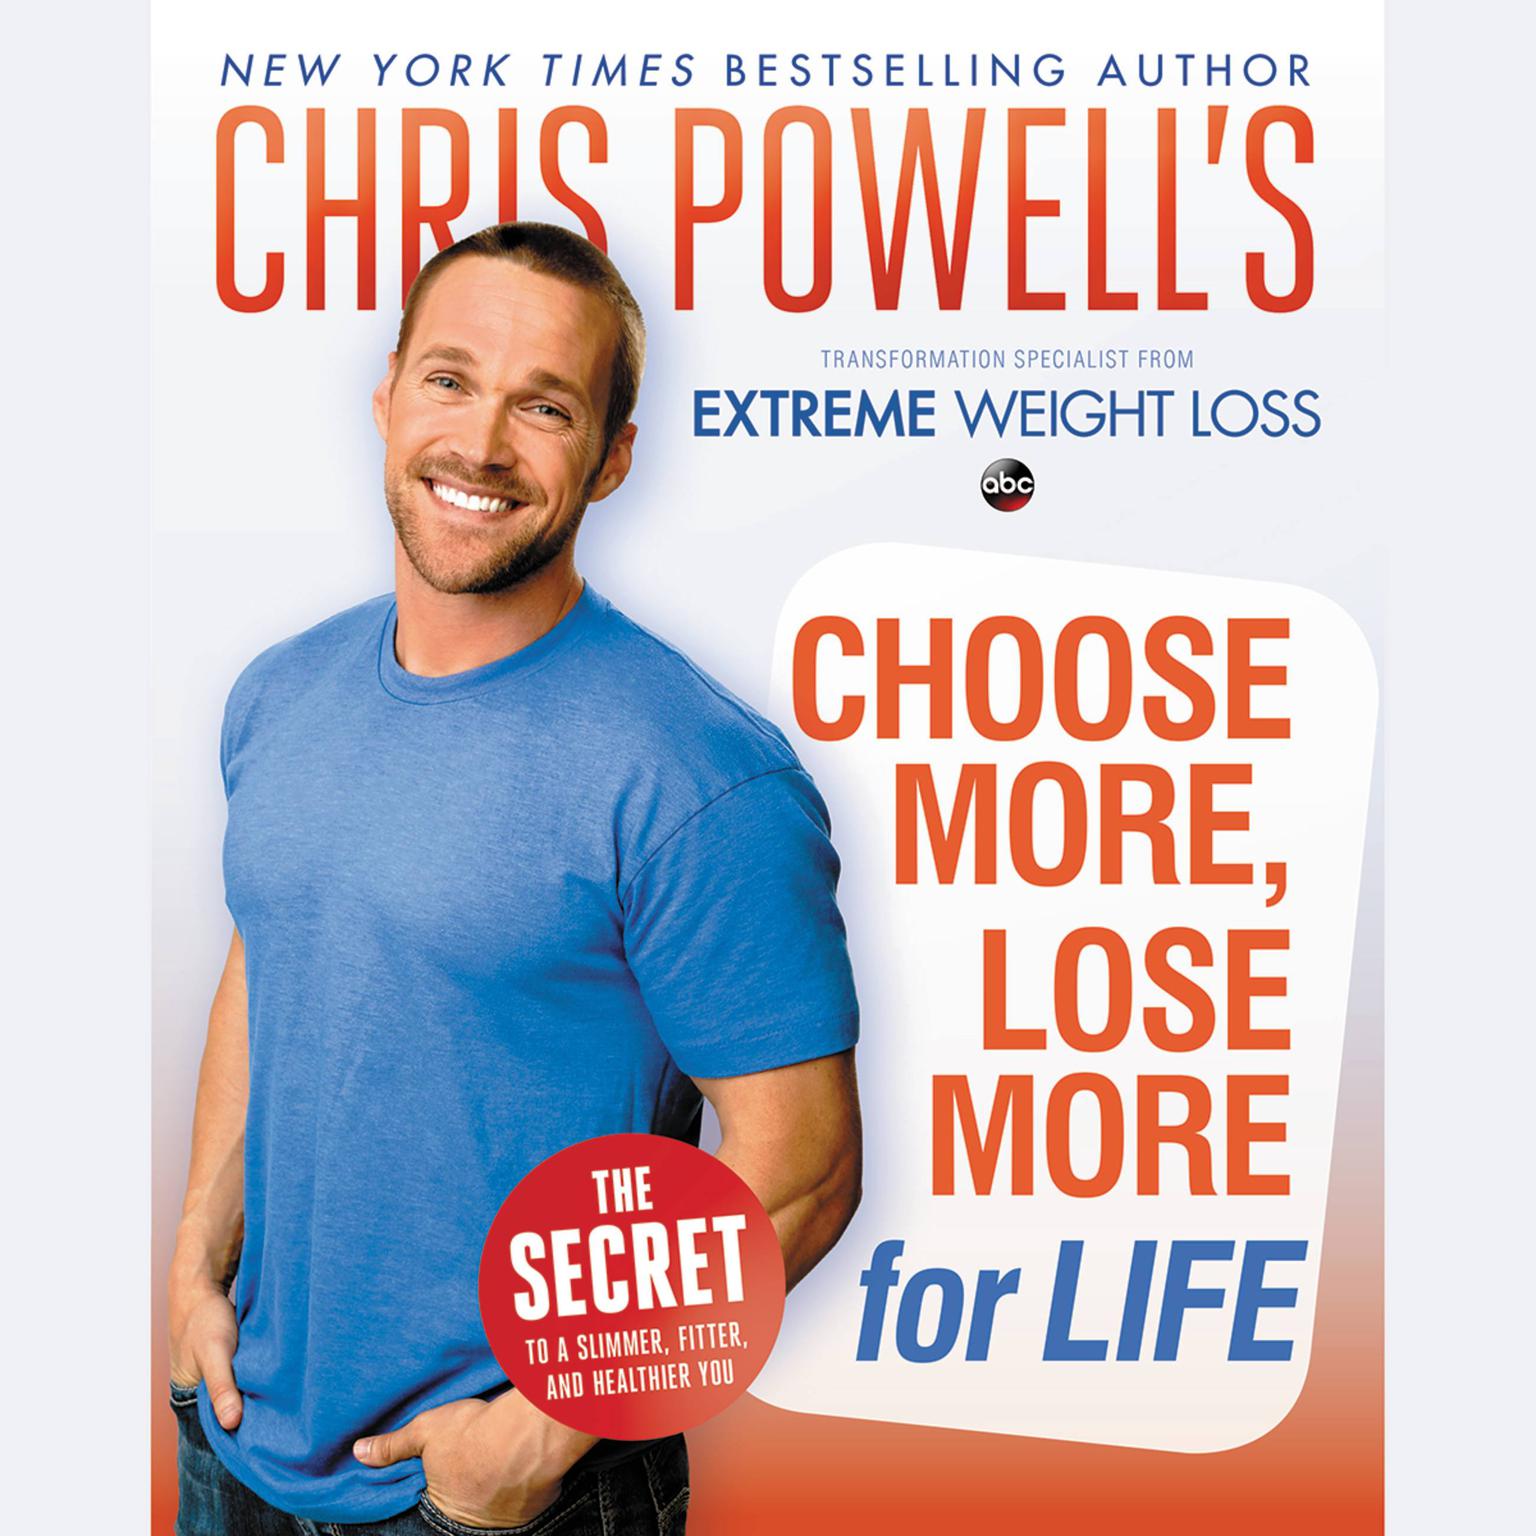 Chris Powells Choose More, Lose More for Life Audiobook, by Chris Powell